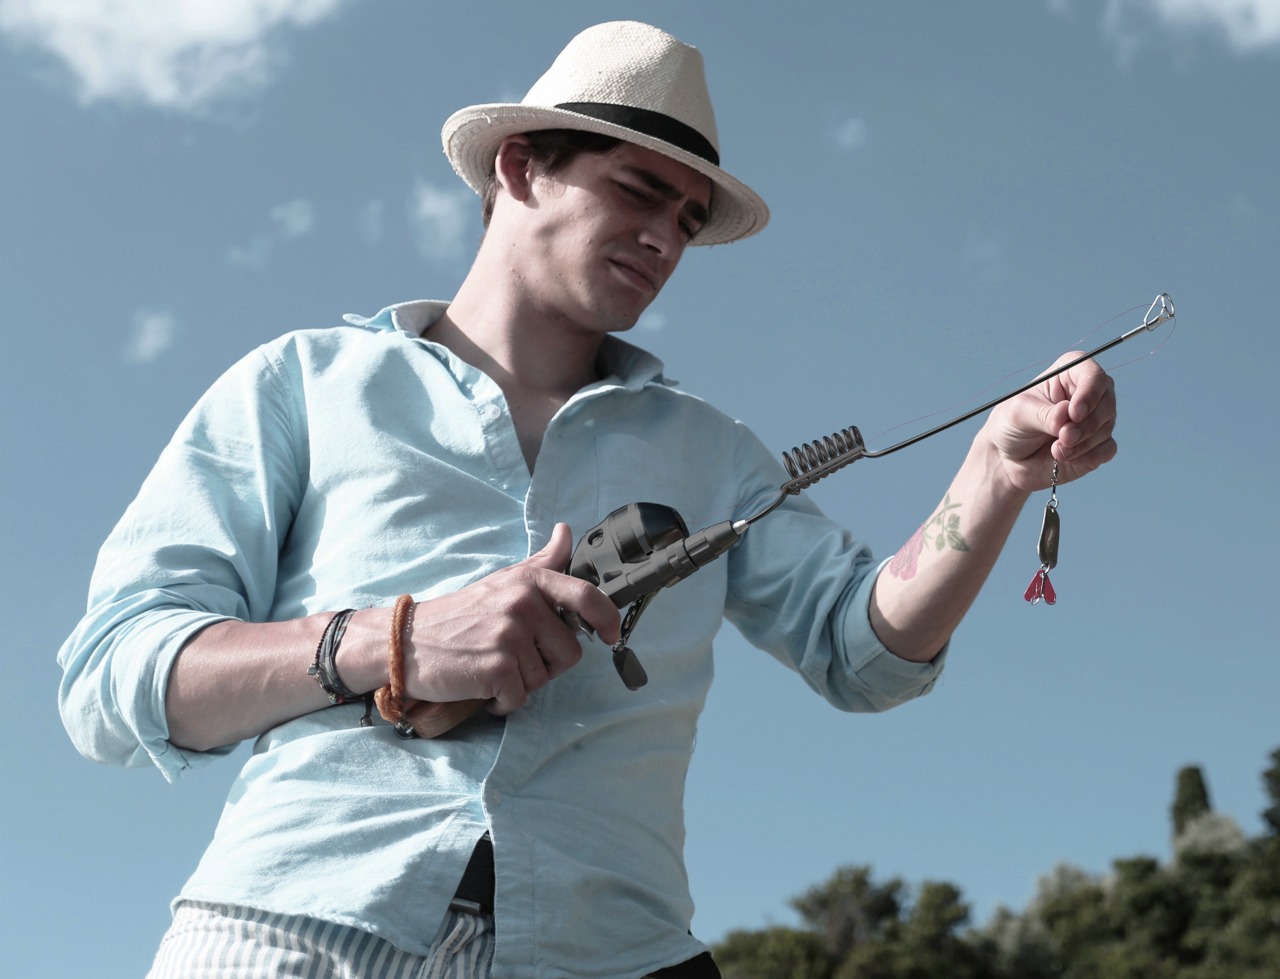 Fishing rod with a GoPro mount lets you capture your high-adrenaline trophy  catch on video - Yanko Design